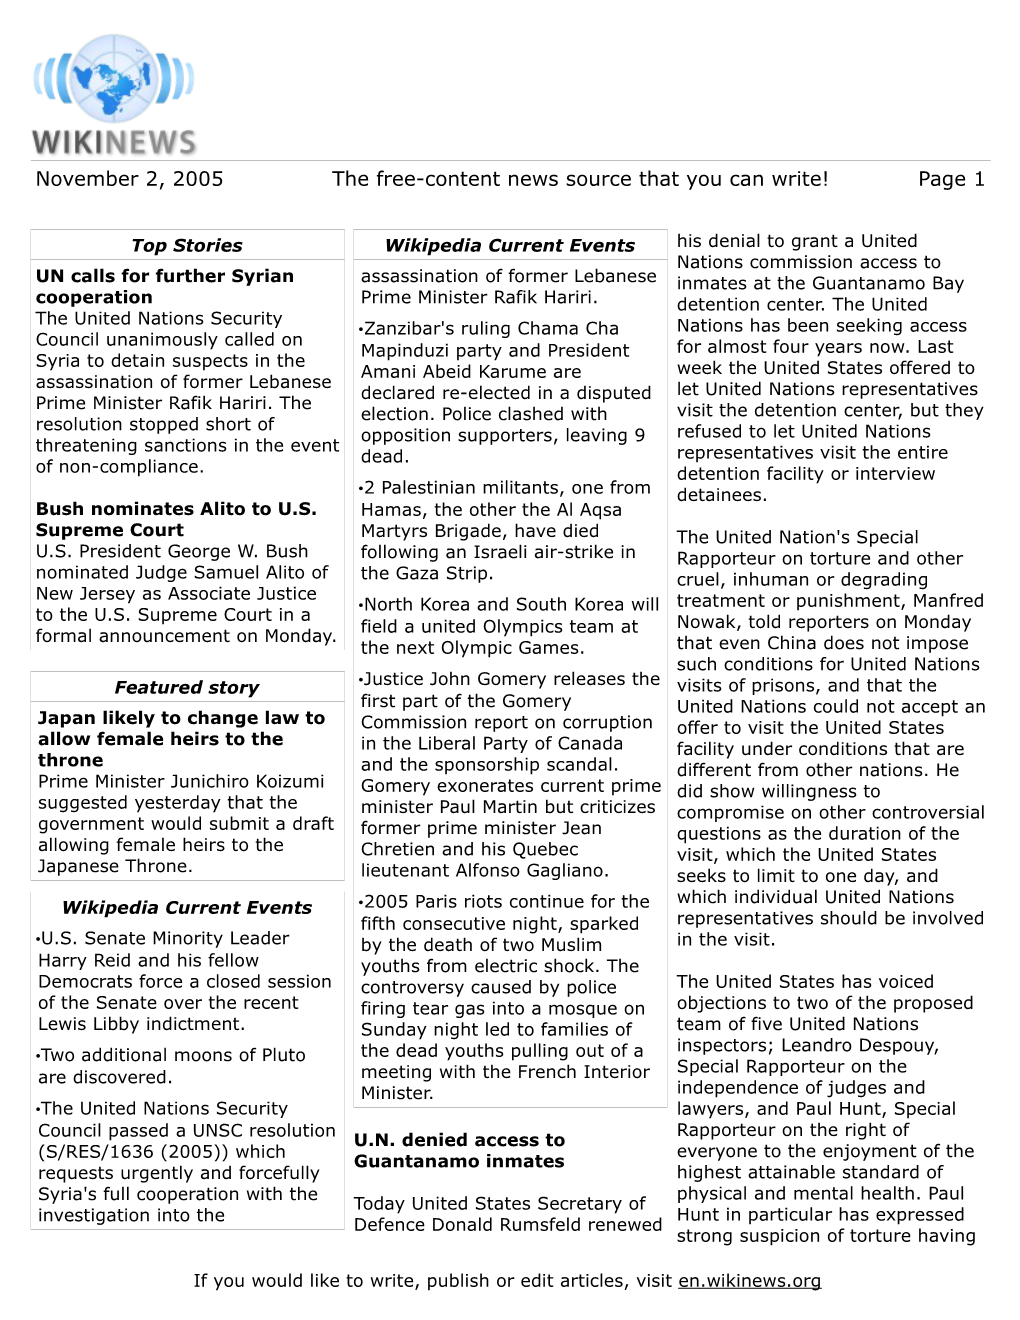 November 2, 2005 the Free-Content News Source That You Can Write! Page 1